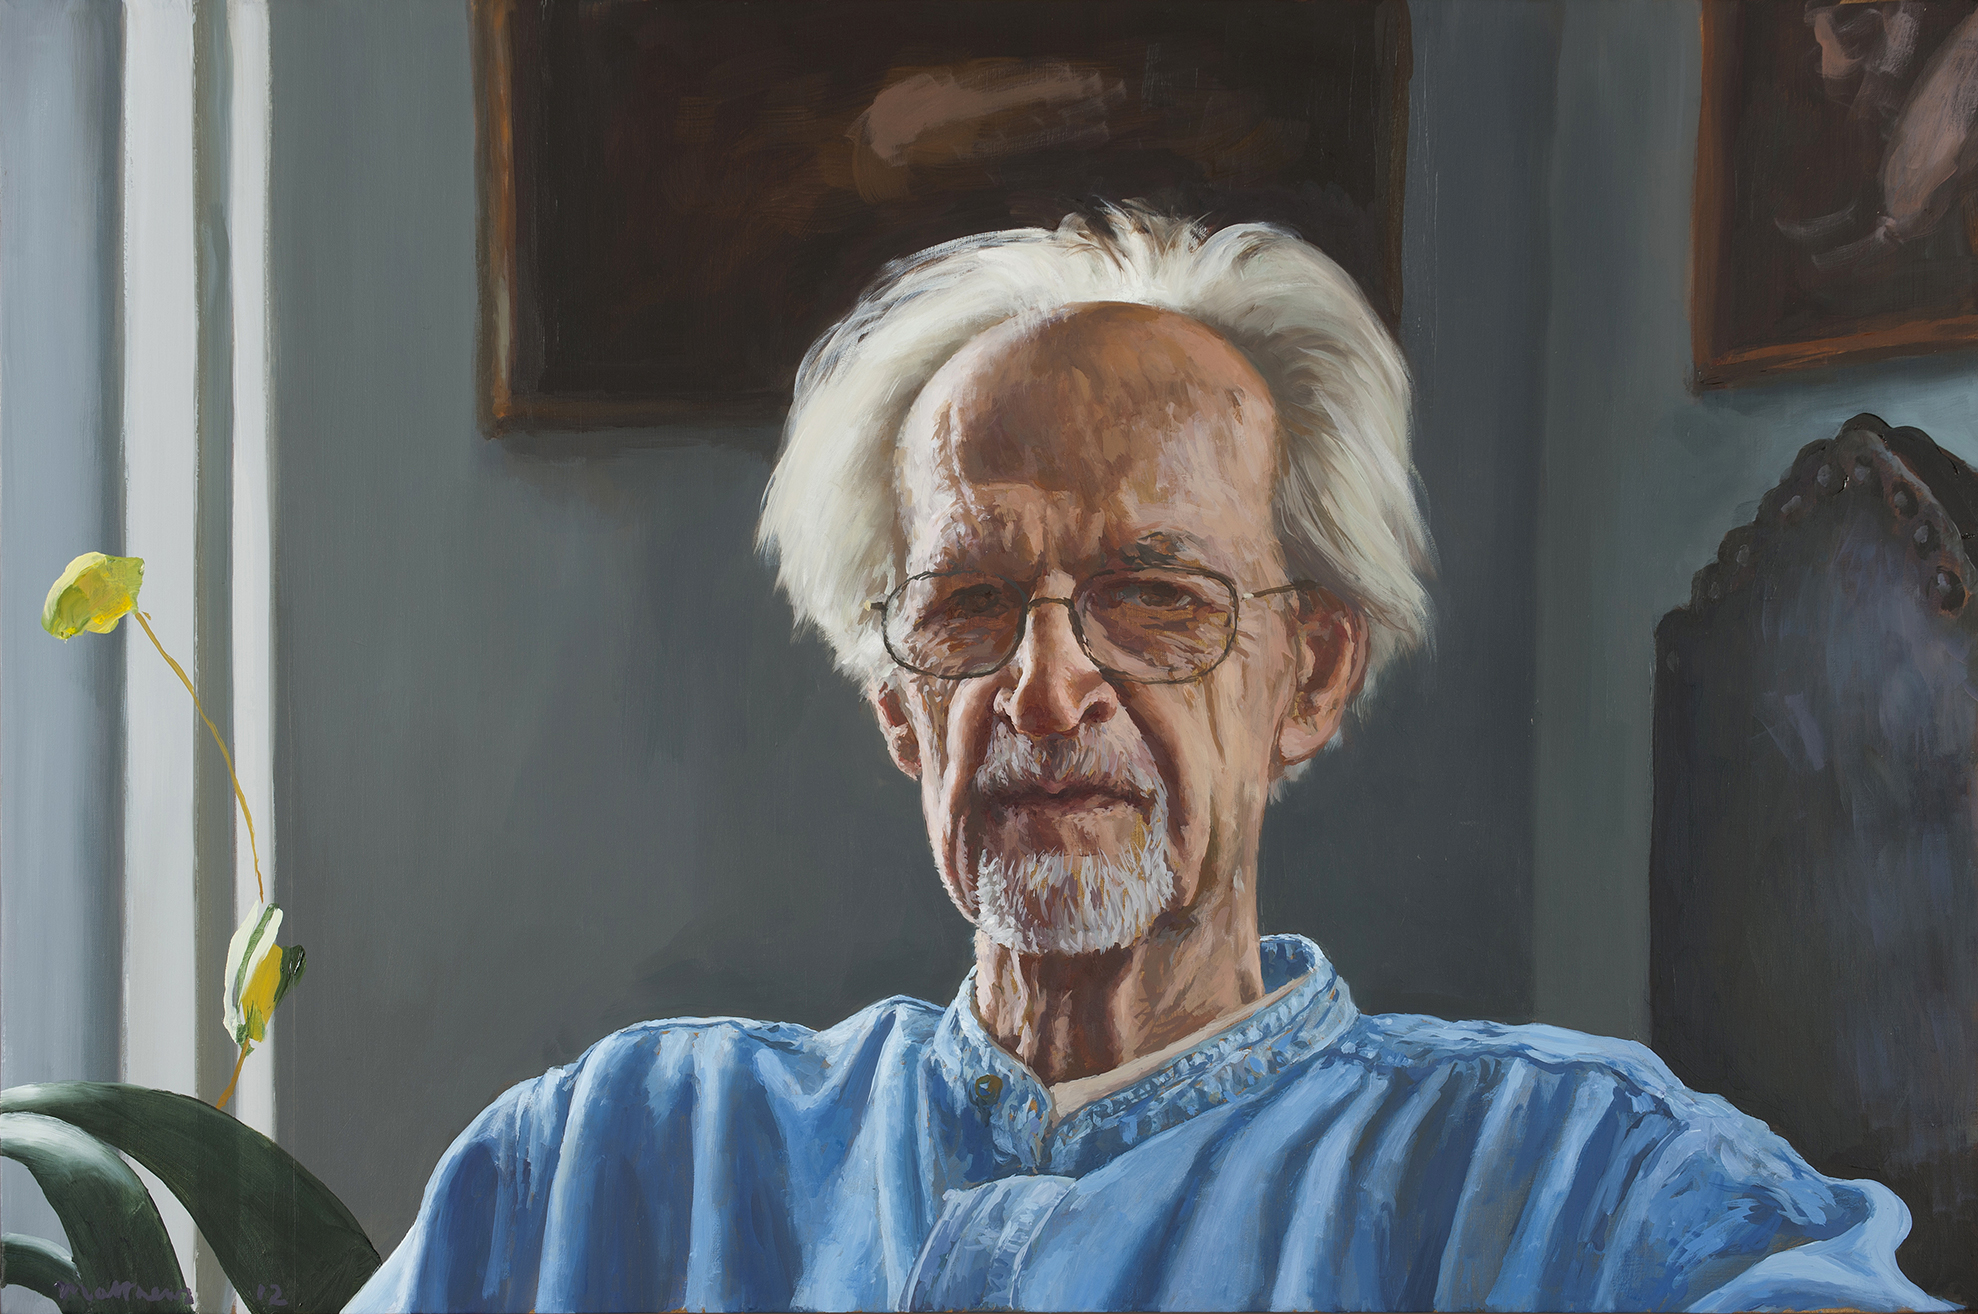  Karl in His Own Space; oil on canvas, 20 x 30 inches, 2012  